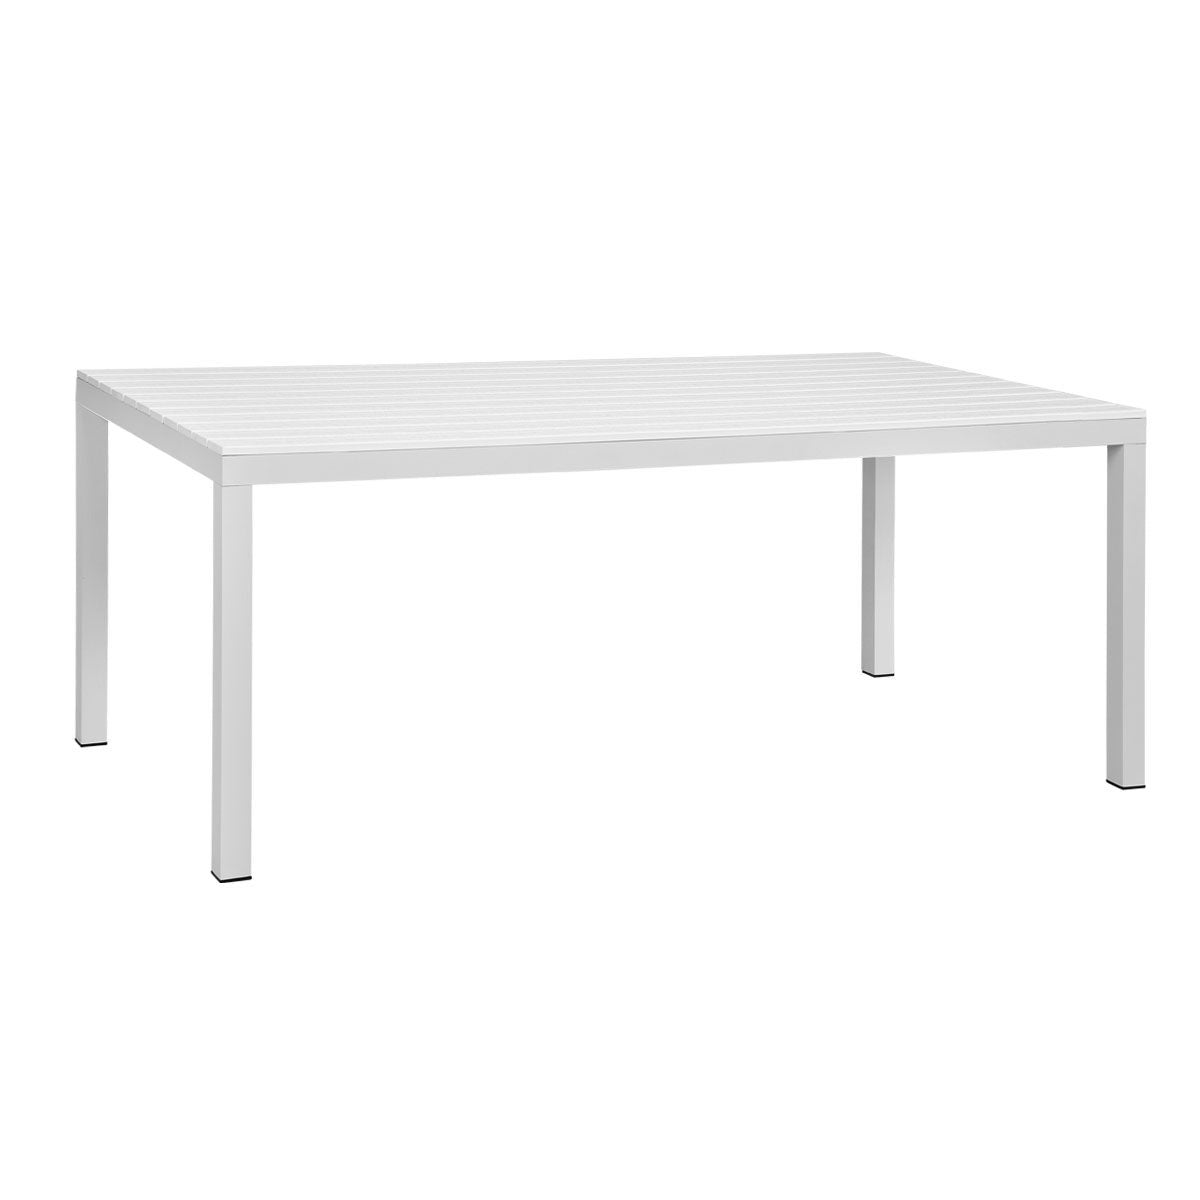 Manly White Aluminium Outdoor Dining Table with Faux wood Top (180x95cm)